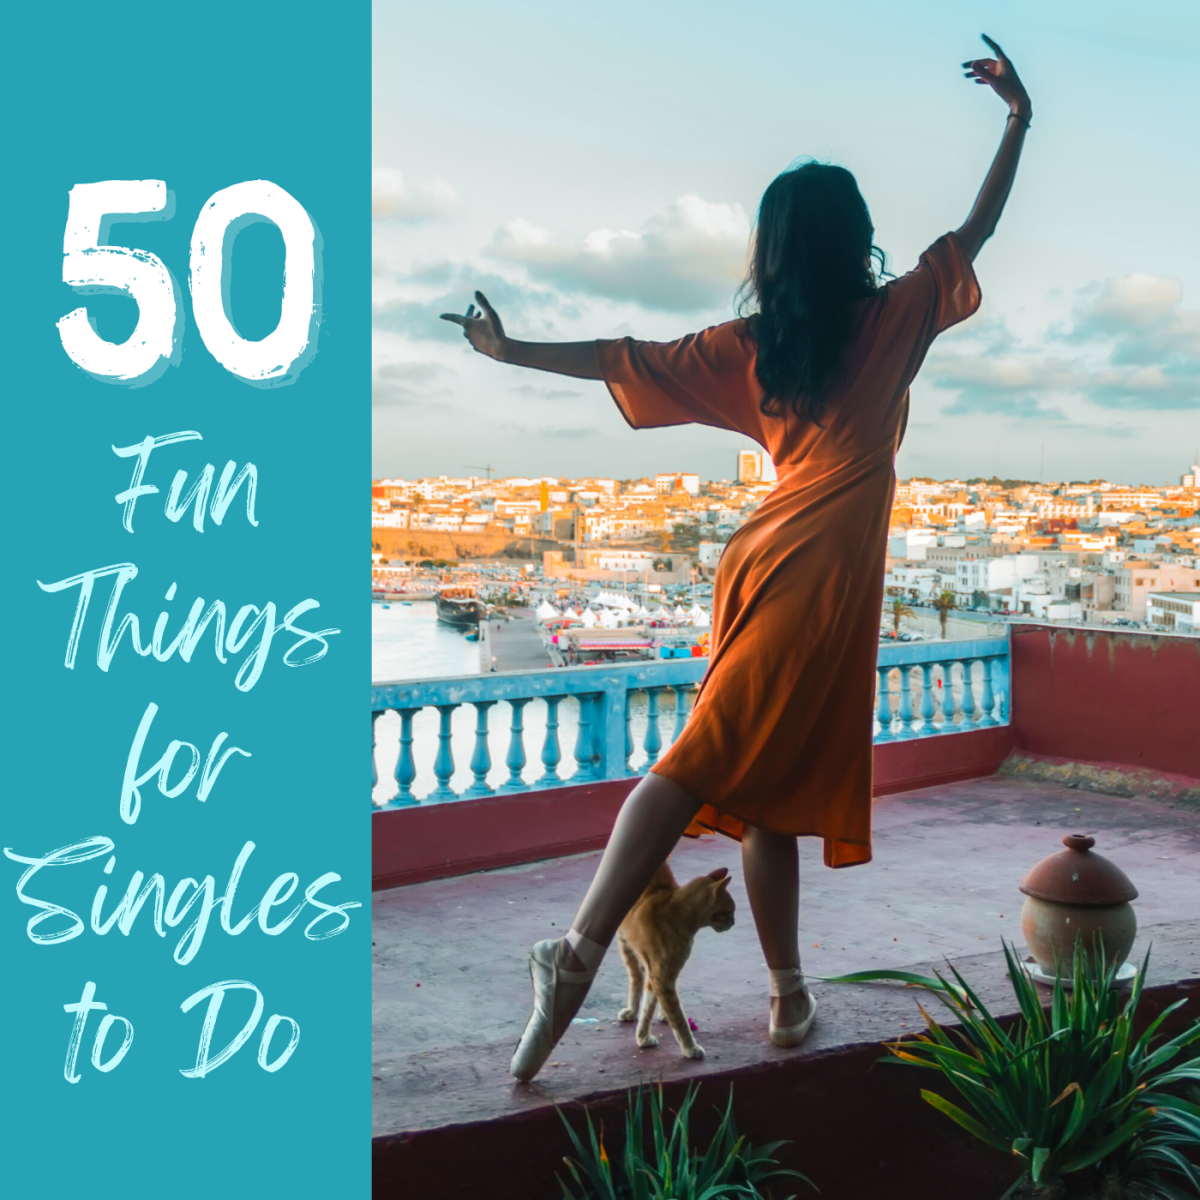 Single and bored? Try one of these ideas!